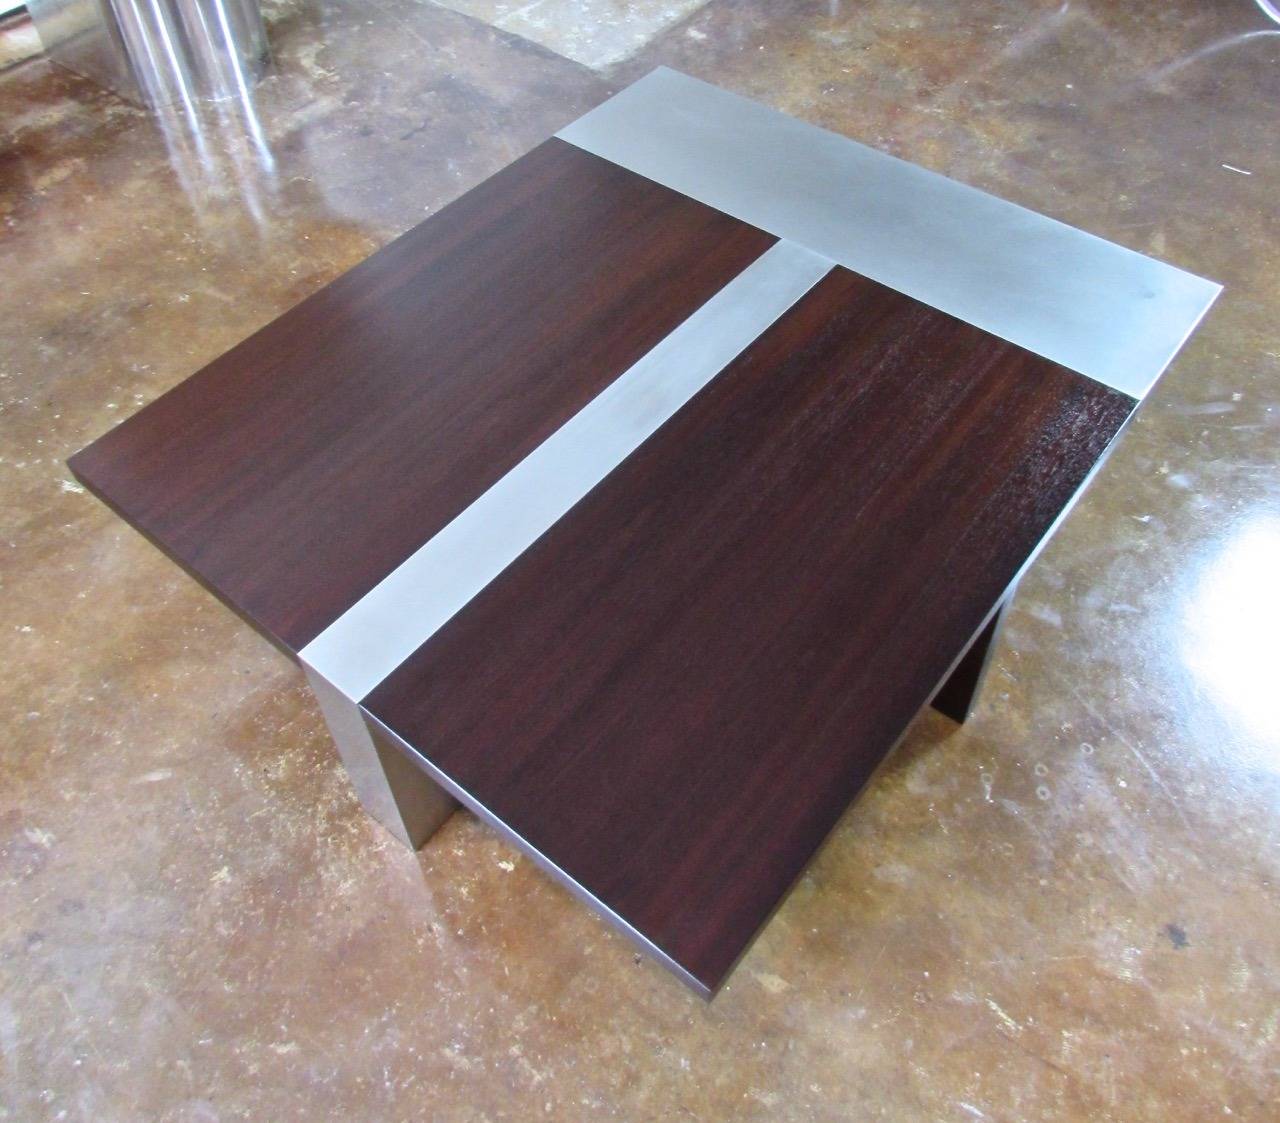 Brushed steel and mahogany Planked coffee table by David Gulassa for Gulassa & Company.  Two available.